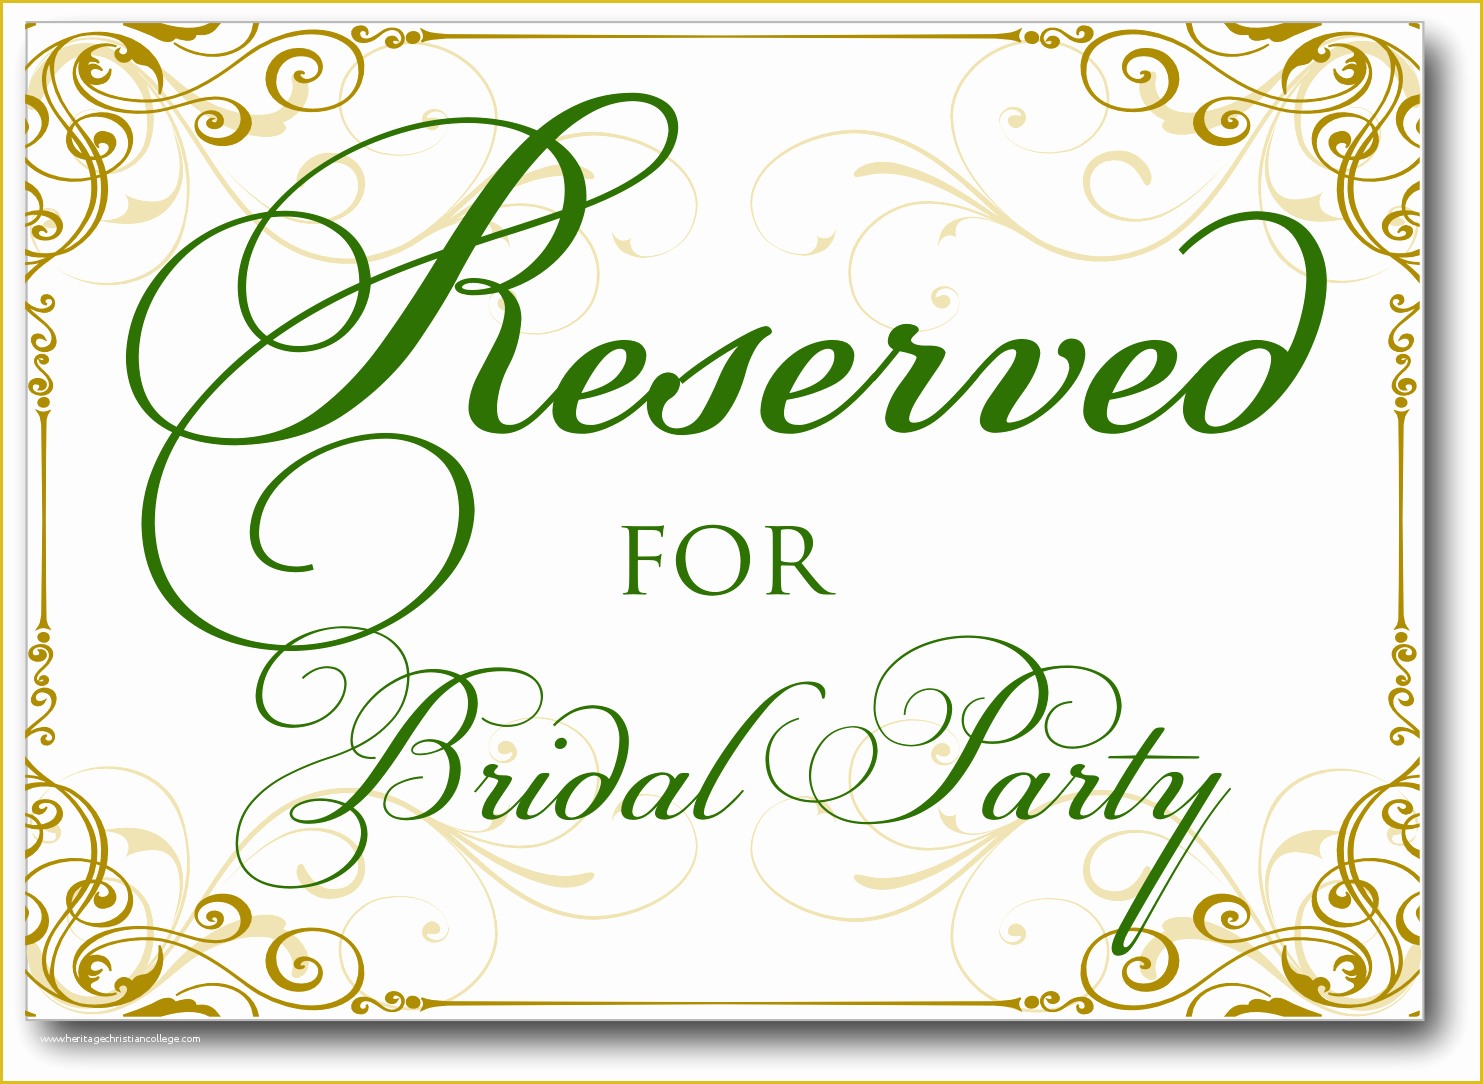 Free Wedding Sign Templates Of Signatures by Sarah Wedding Signs for Britta